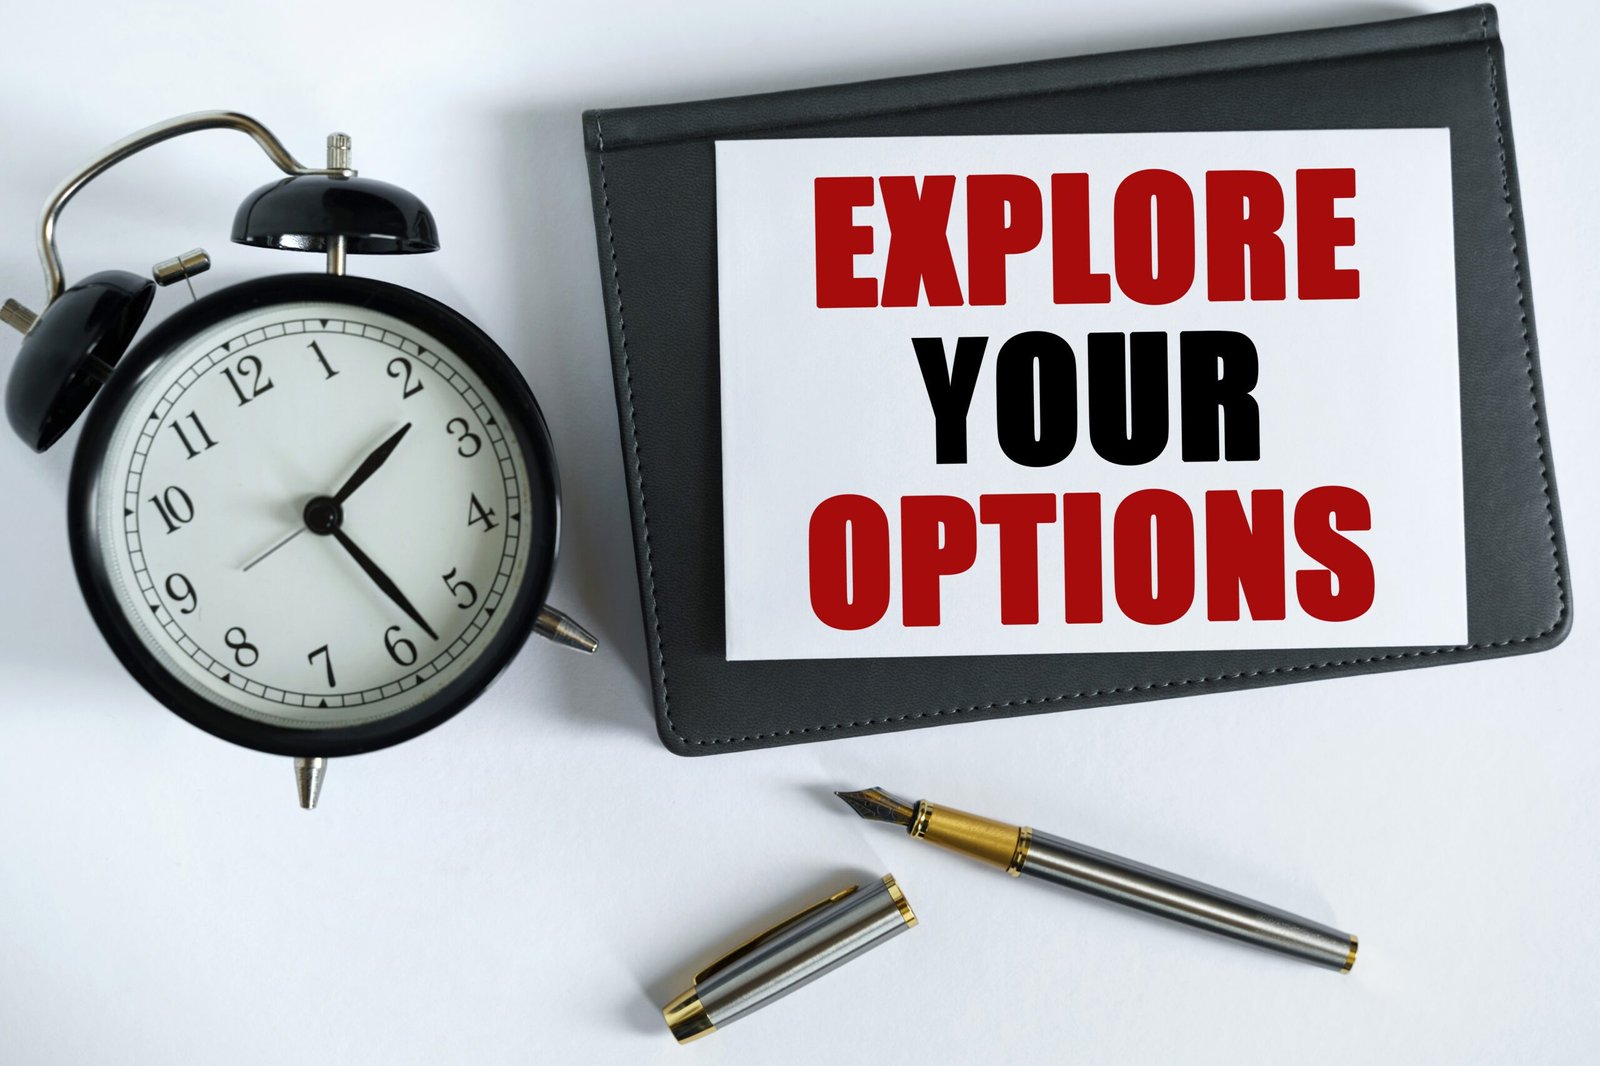 Desk with alarm clock, pen and iPad showing text "Explore your options"